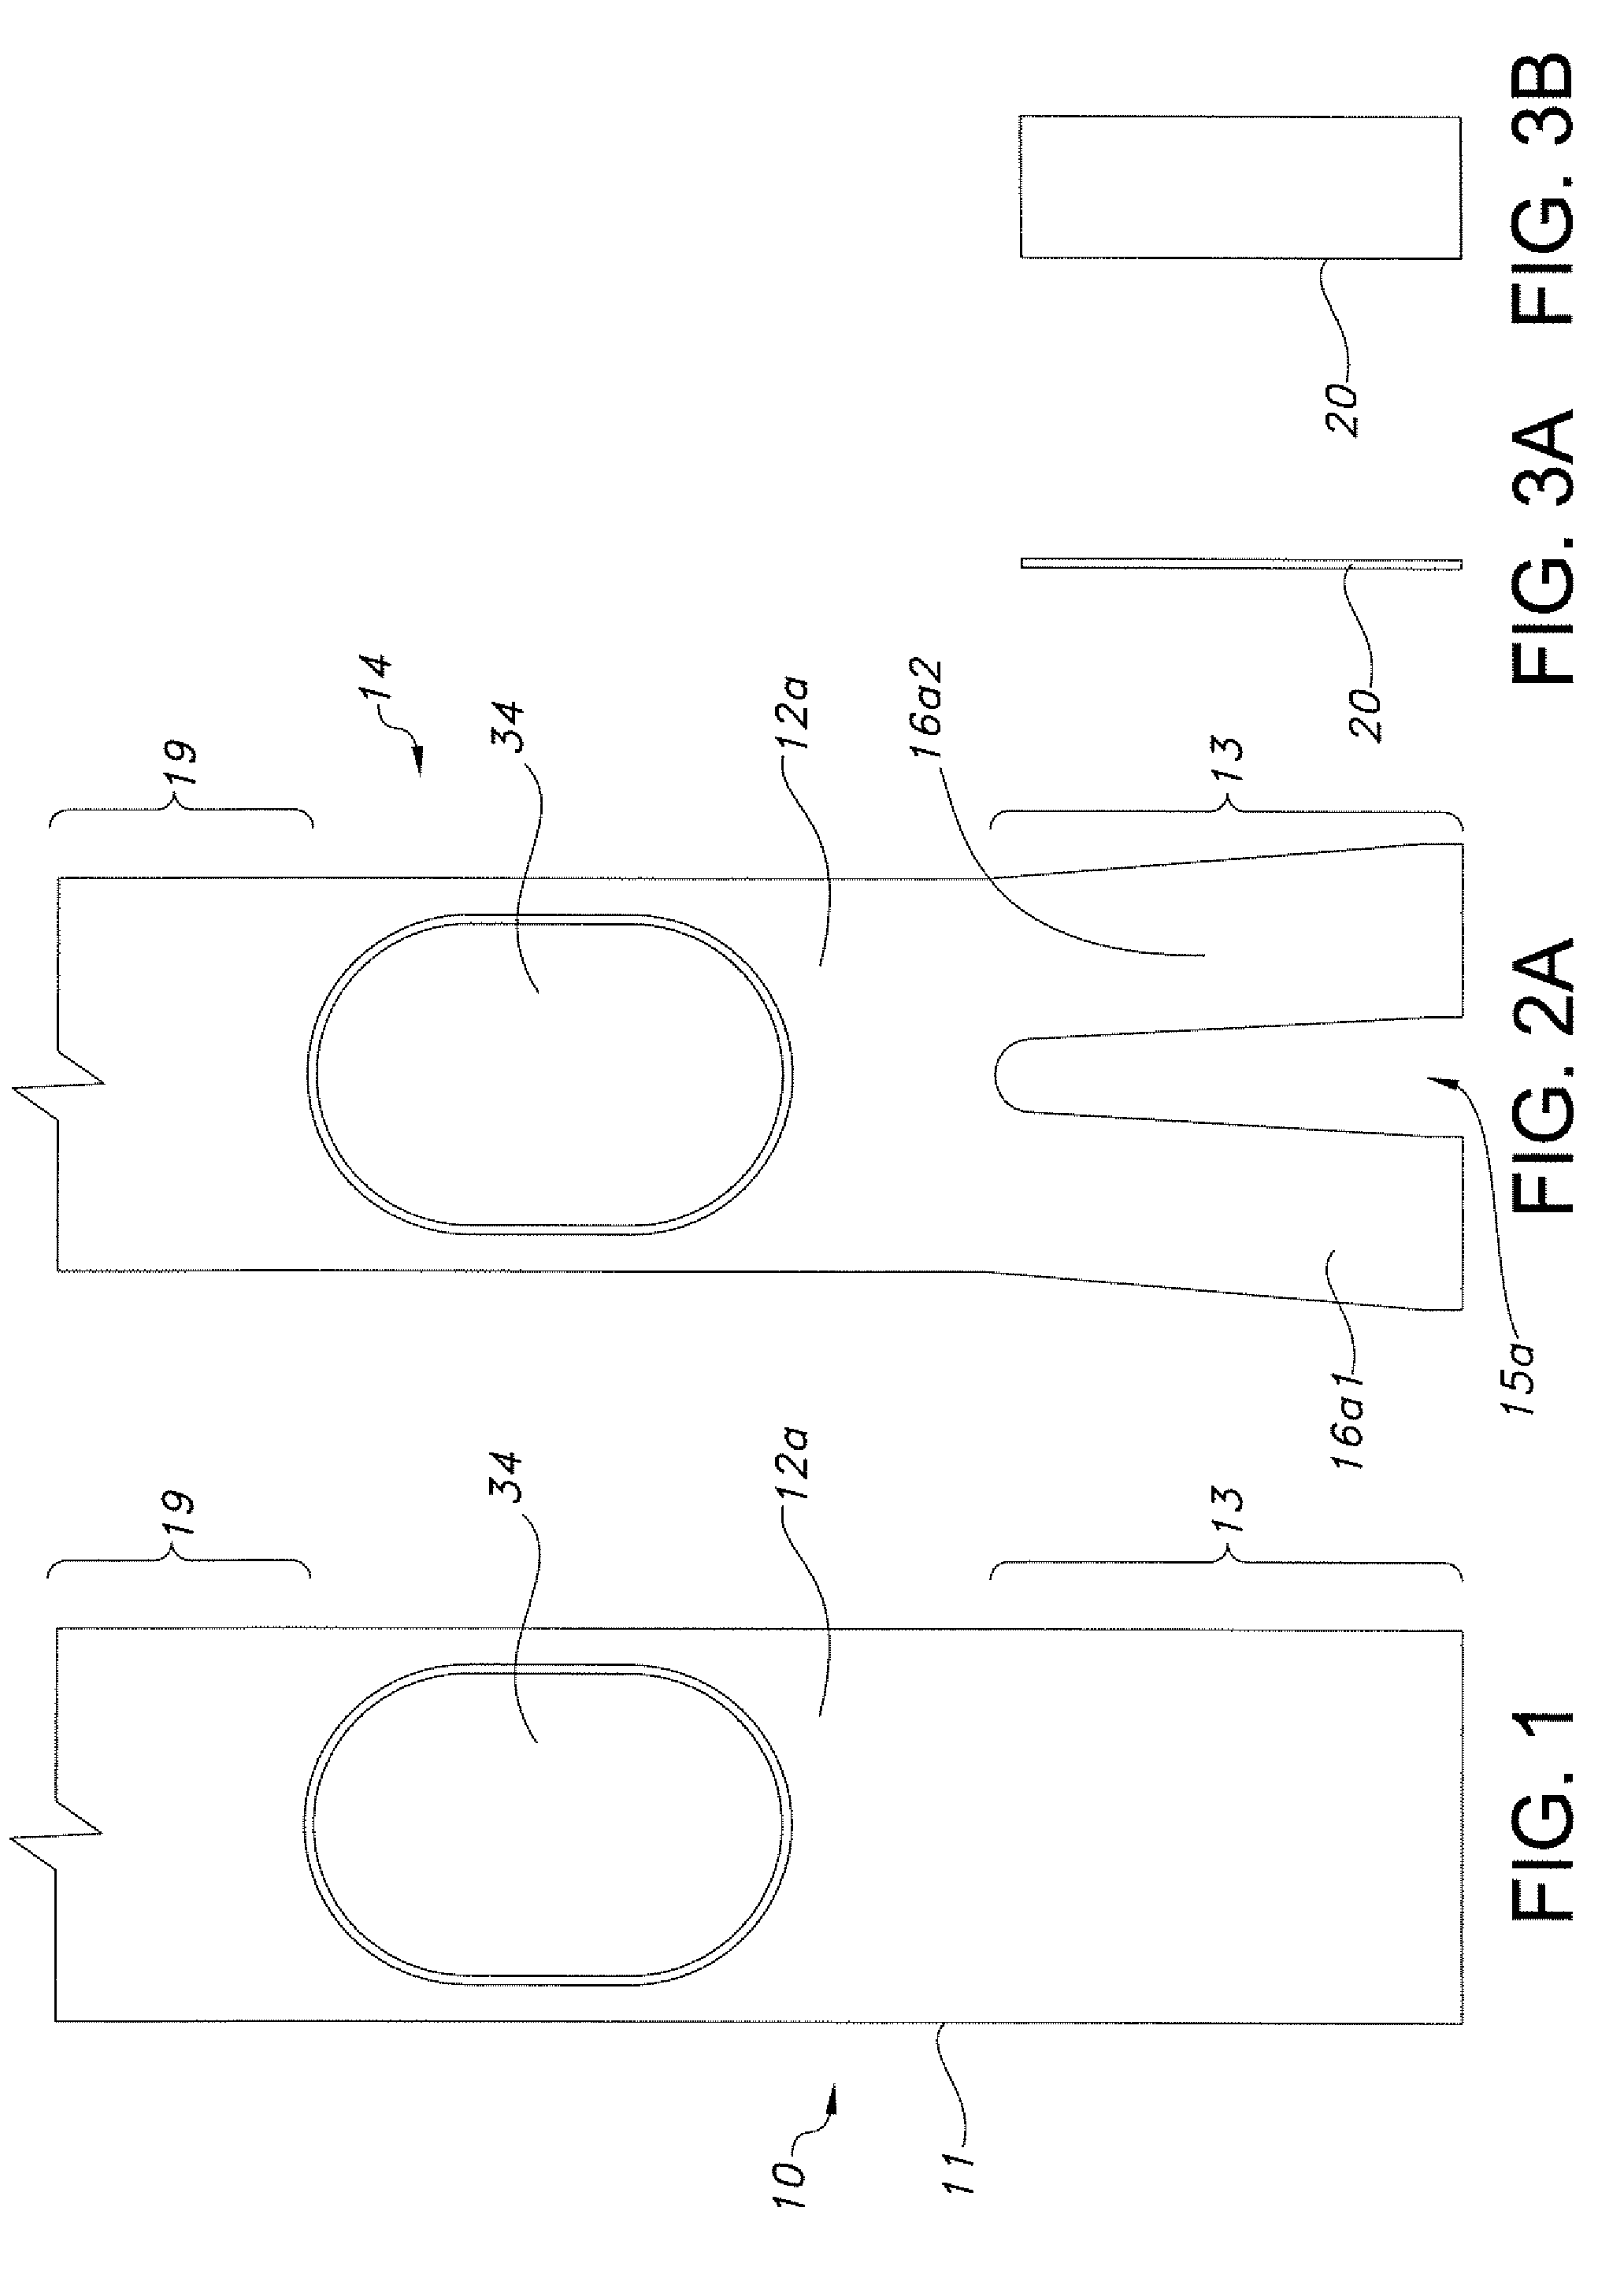 Method and apparatus for improving the strength of a utility pole